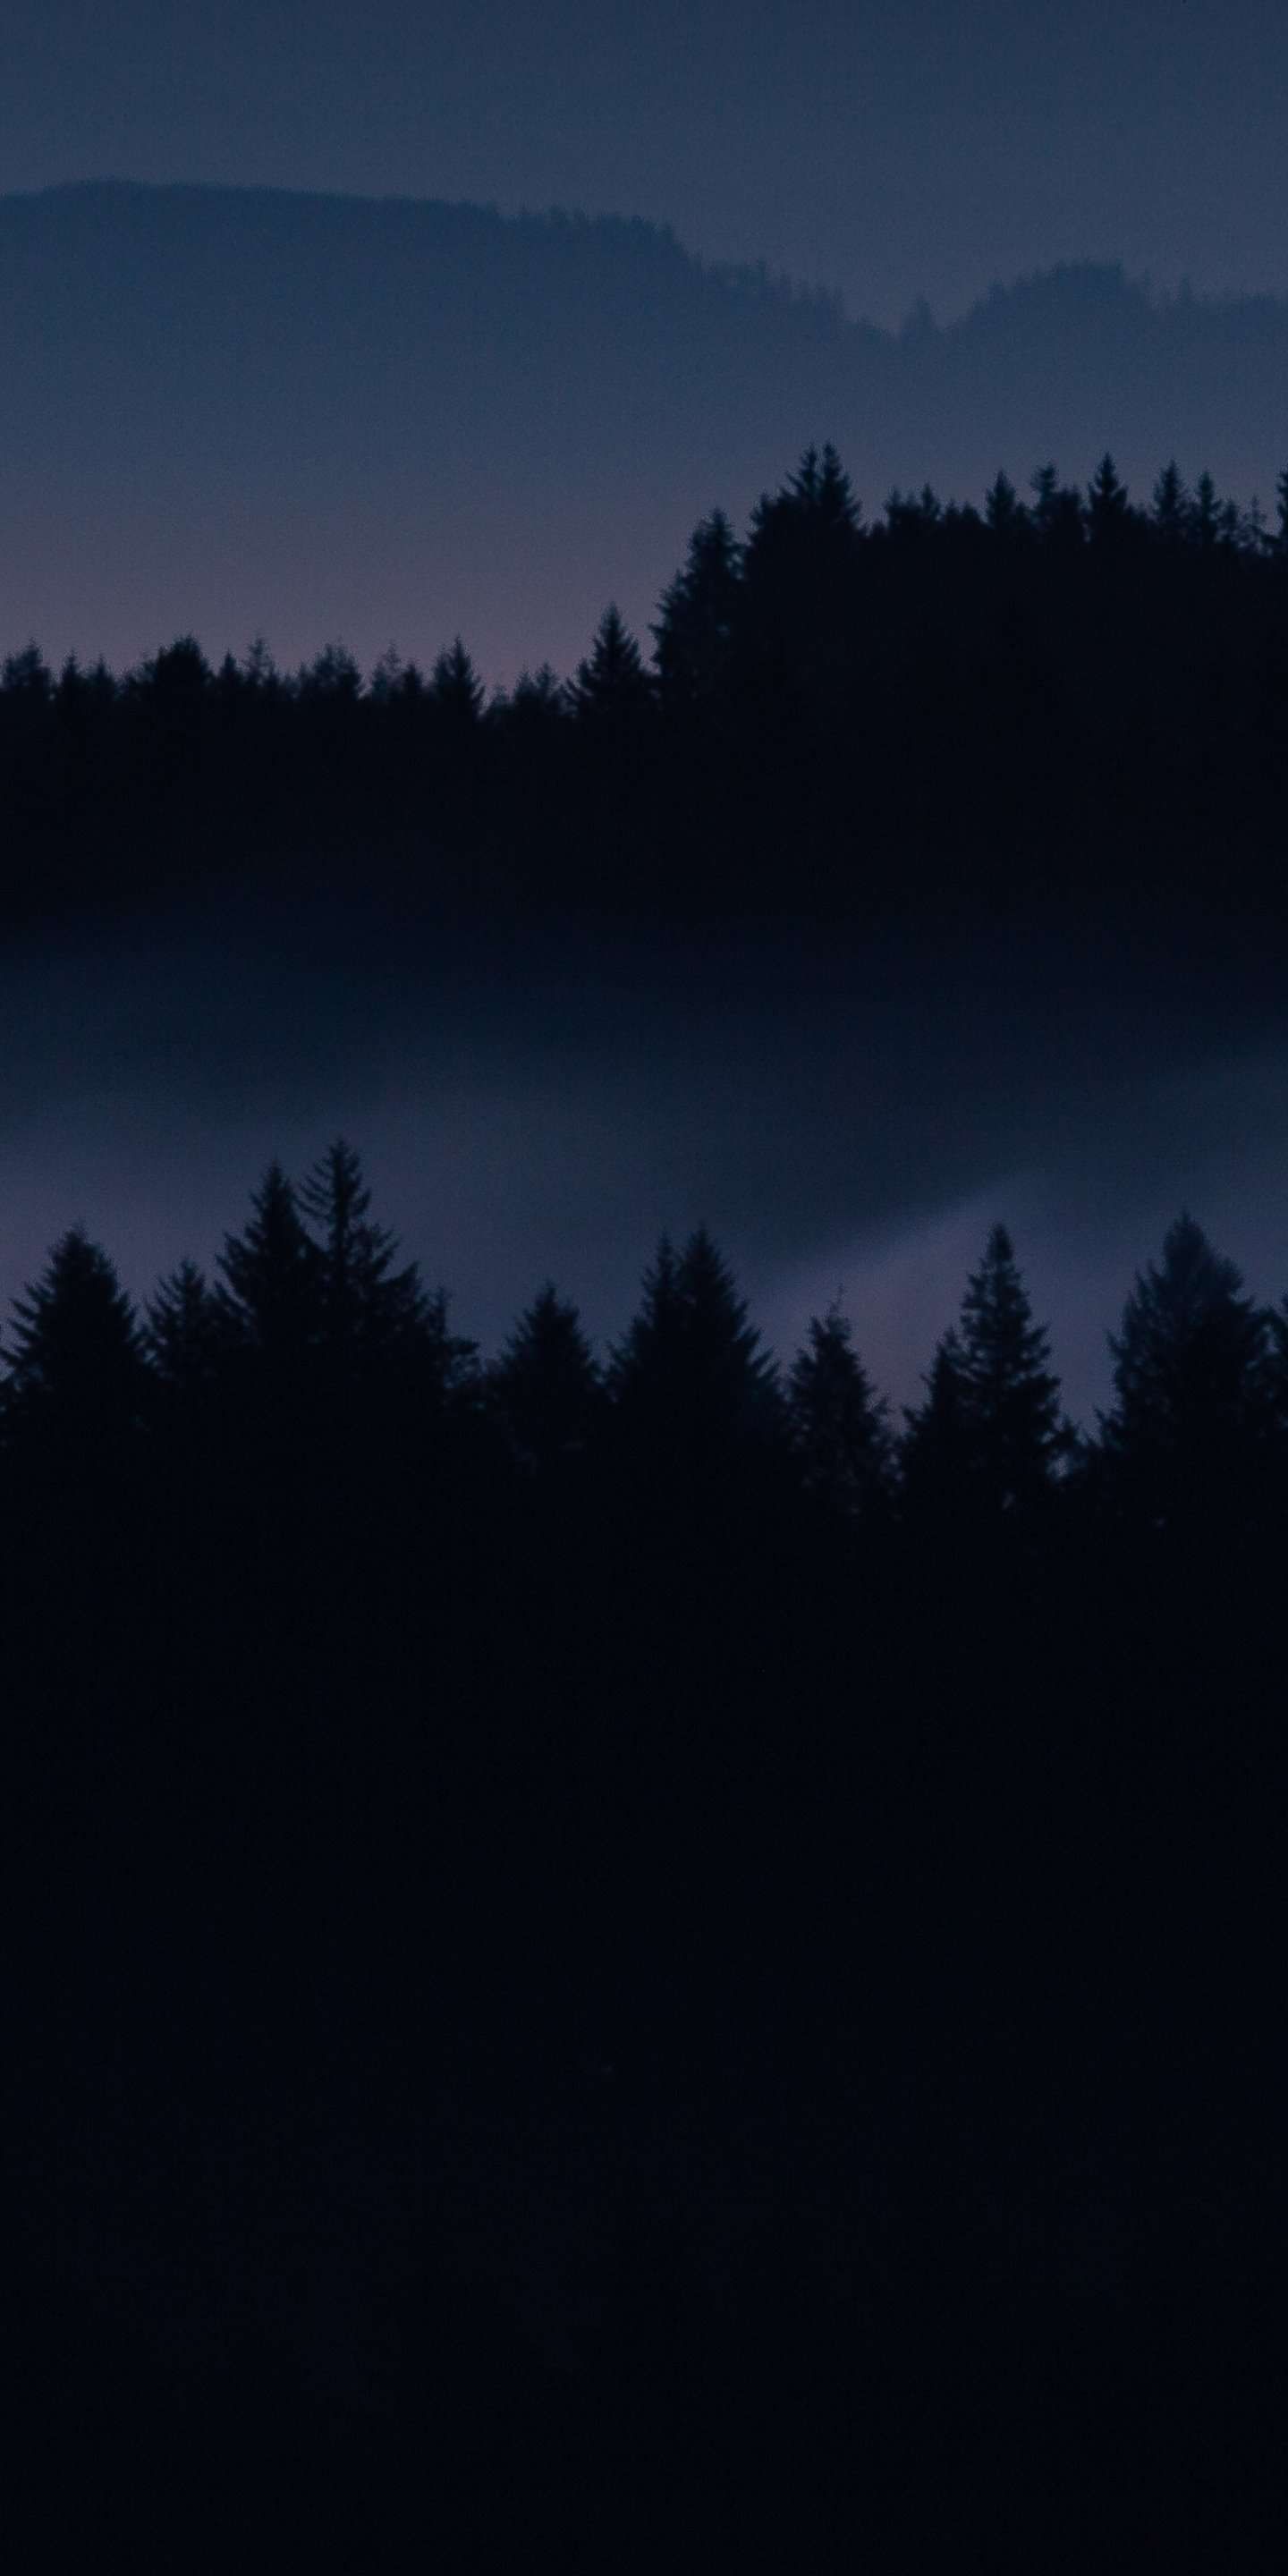  Dark  Forest  Wallpapers  For Android  1440x2880 Wallpaper  